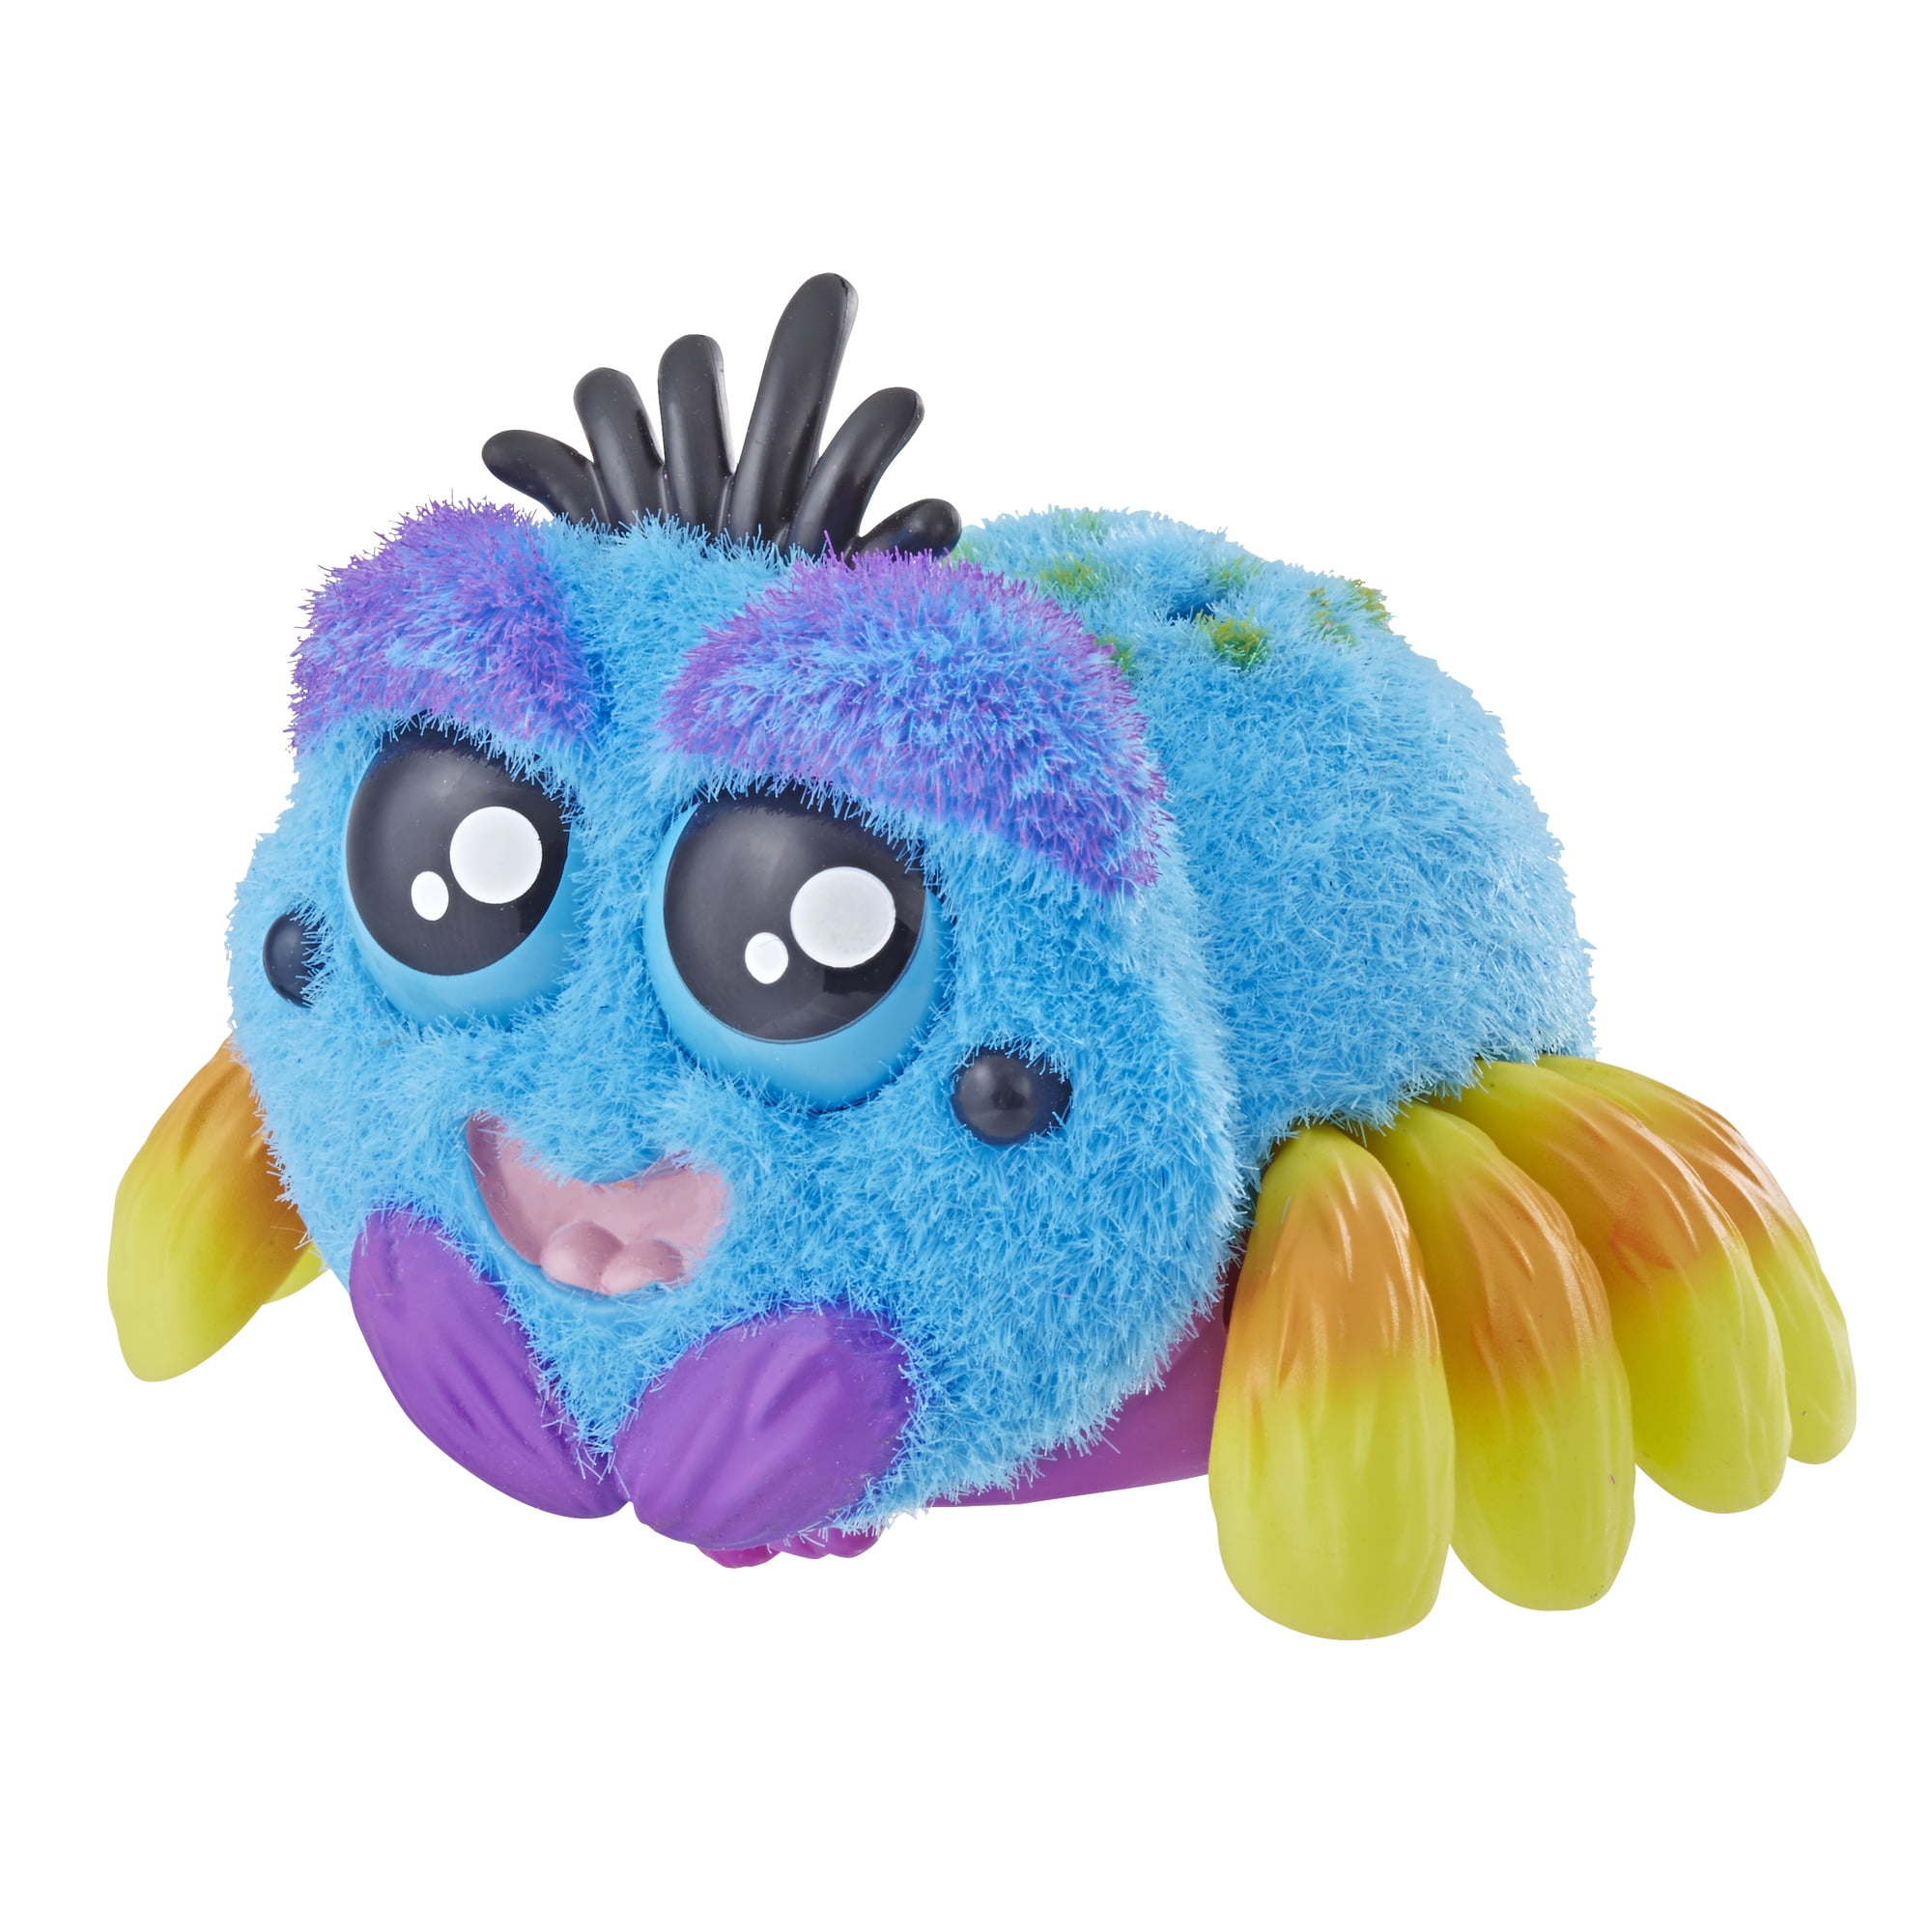 Yellies Sammie Voice-activated Spider Pet Ages 5 and up for sale online 